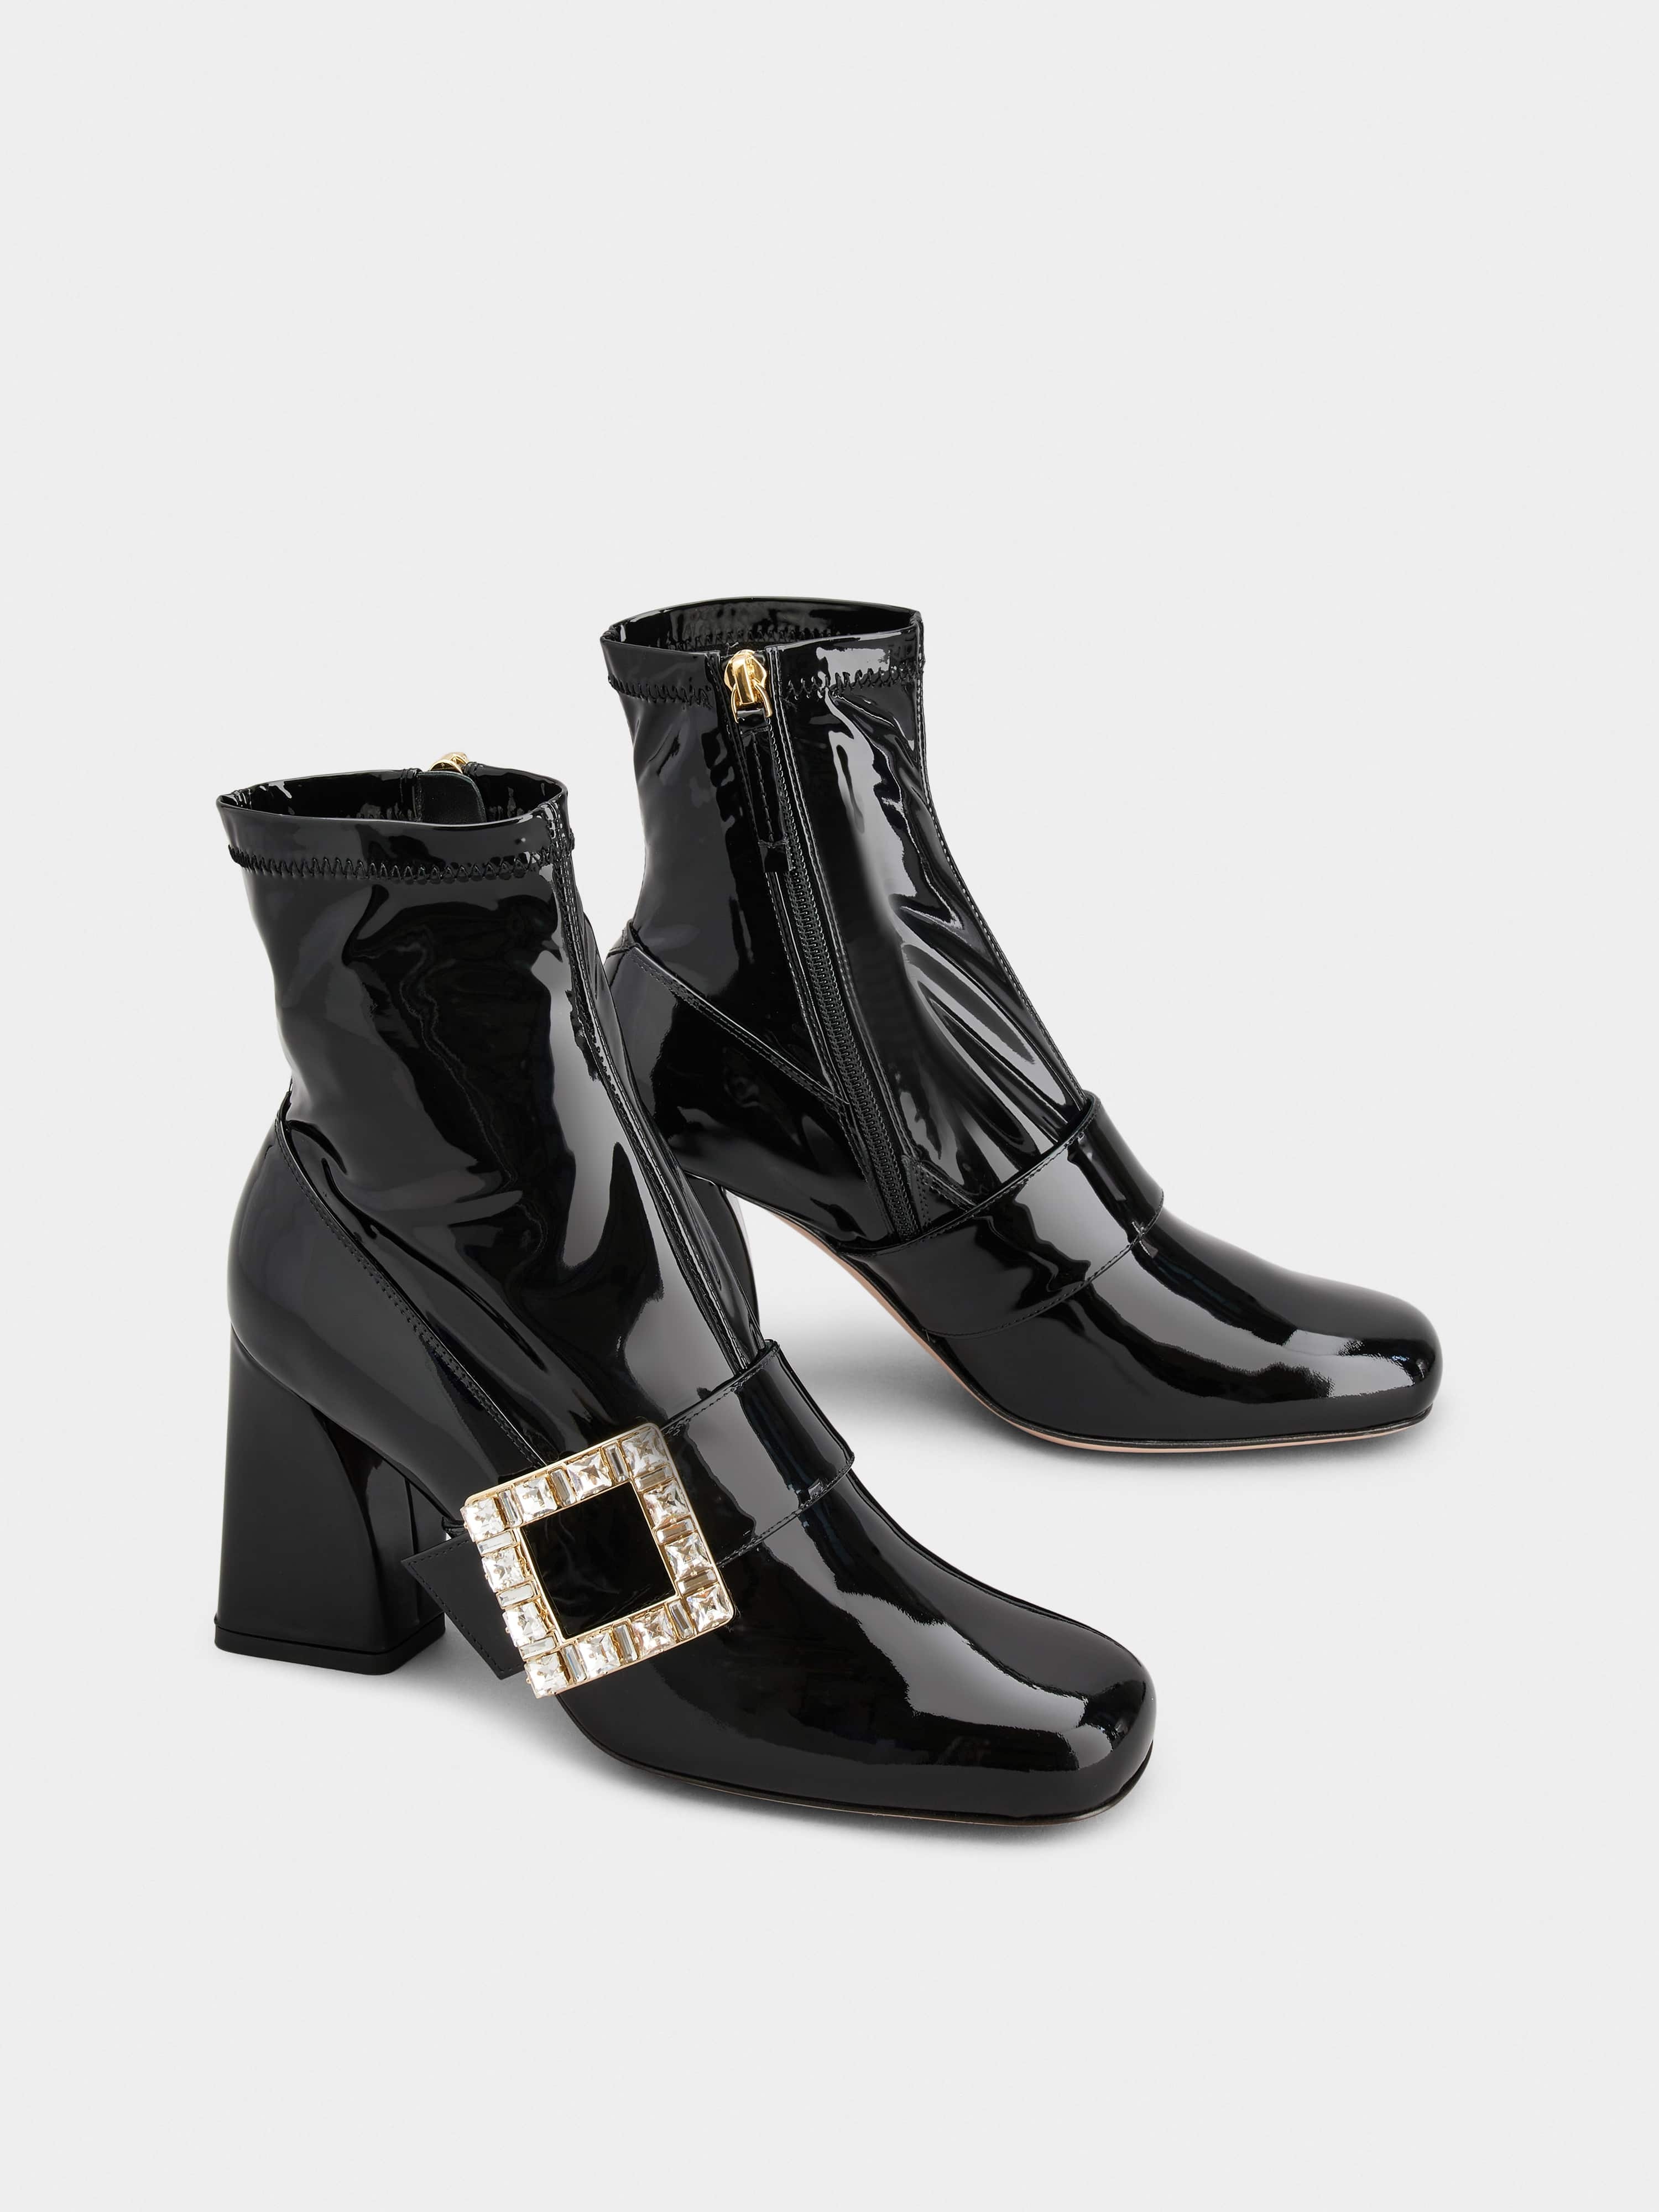 Très Vivier Rhinestone Buckle Ankle Boots in Patent Leather - 2